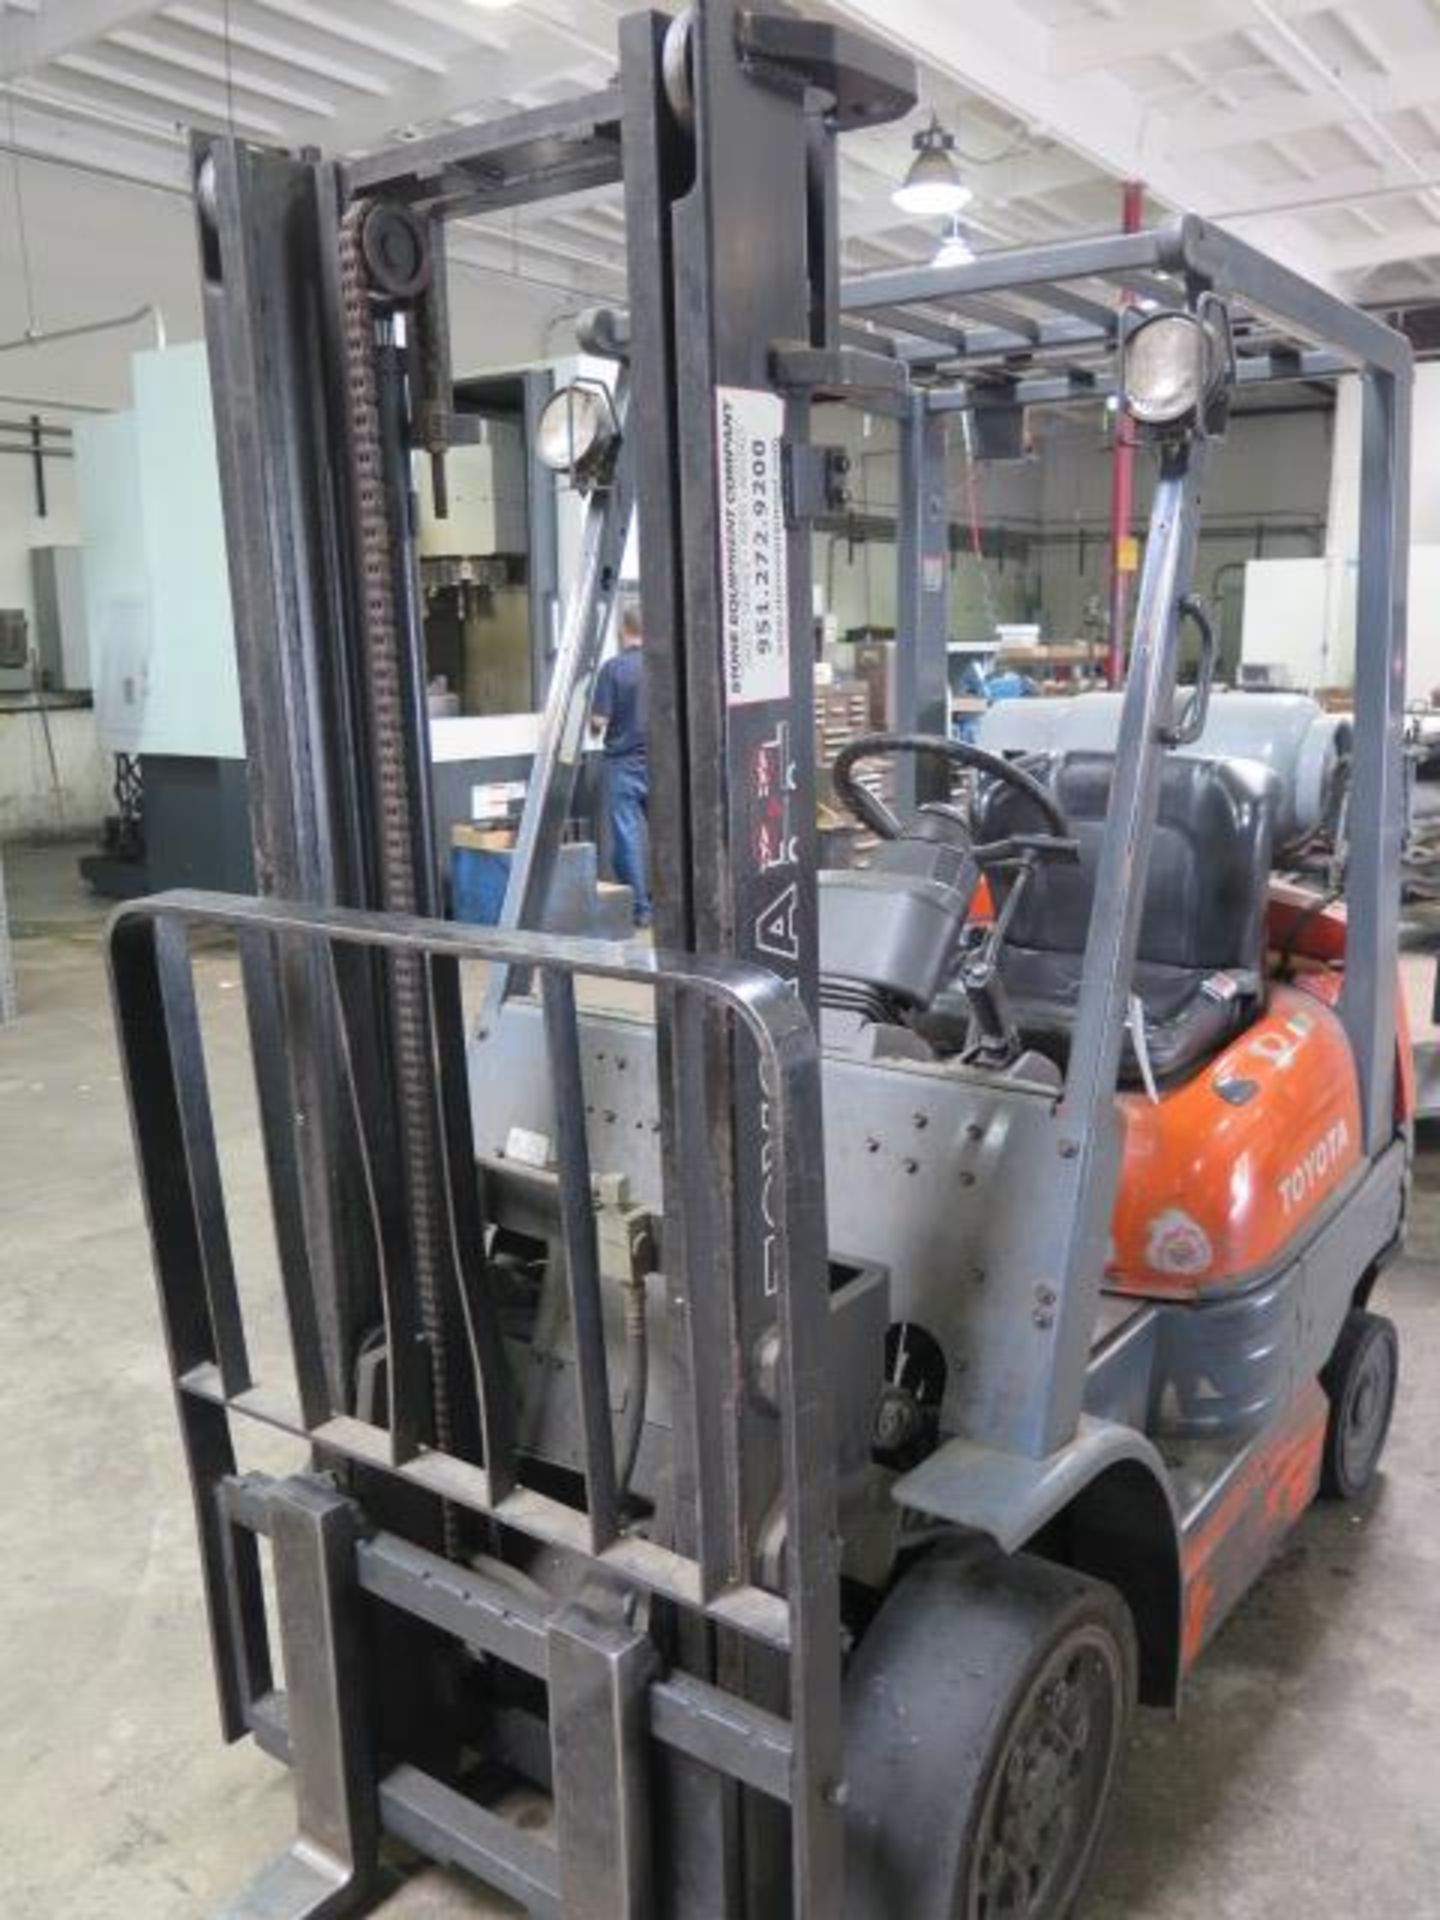 Toyota 42-6FGC20 4400 Lb Cap LPG Forklift s/n 61557 w/ 2-Stage Mast, 130” Lift Height, SOLD AS IS - Image 4 of 13